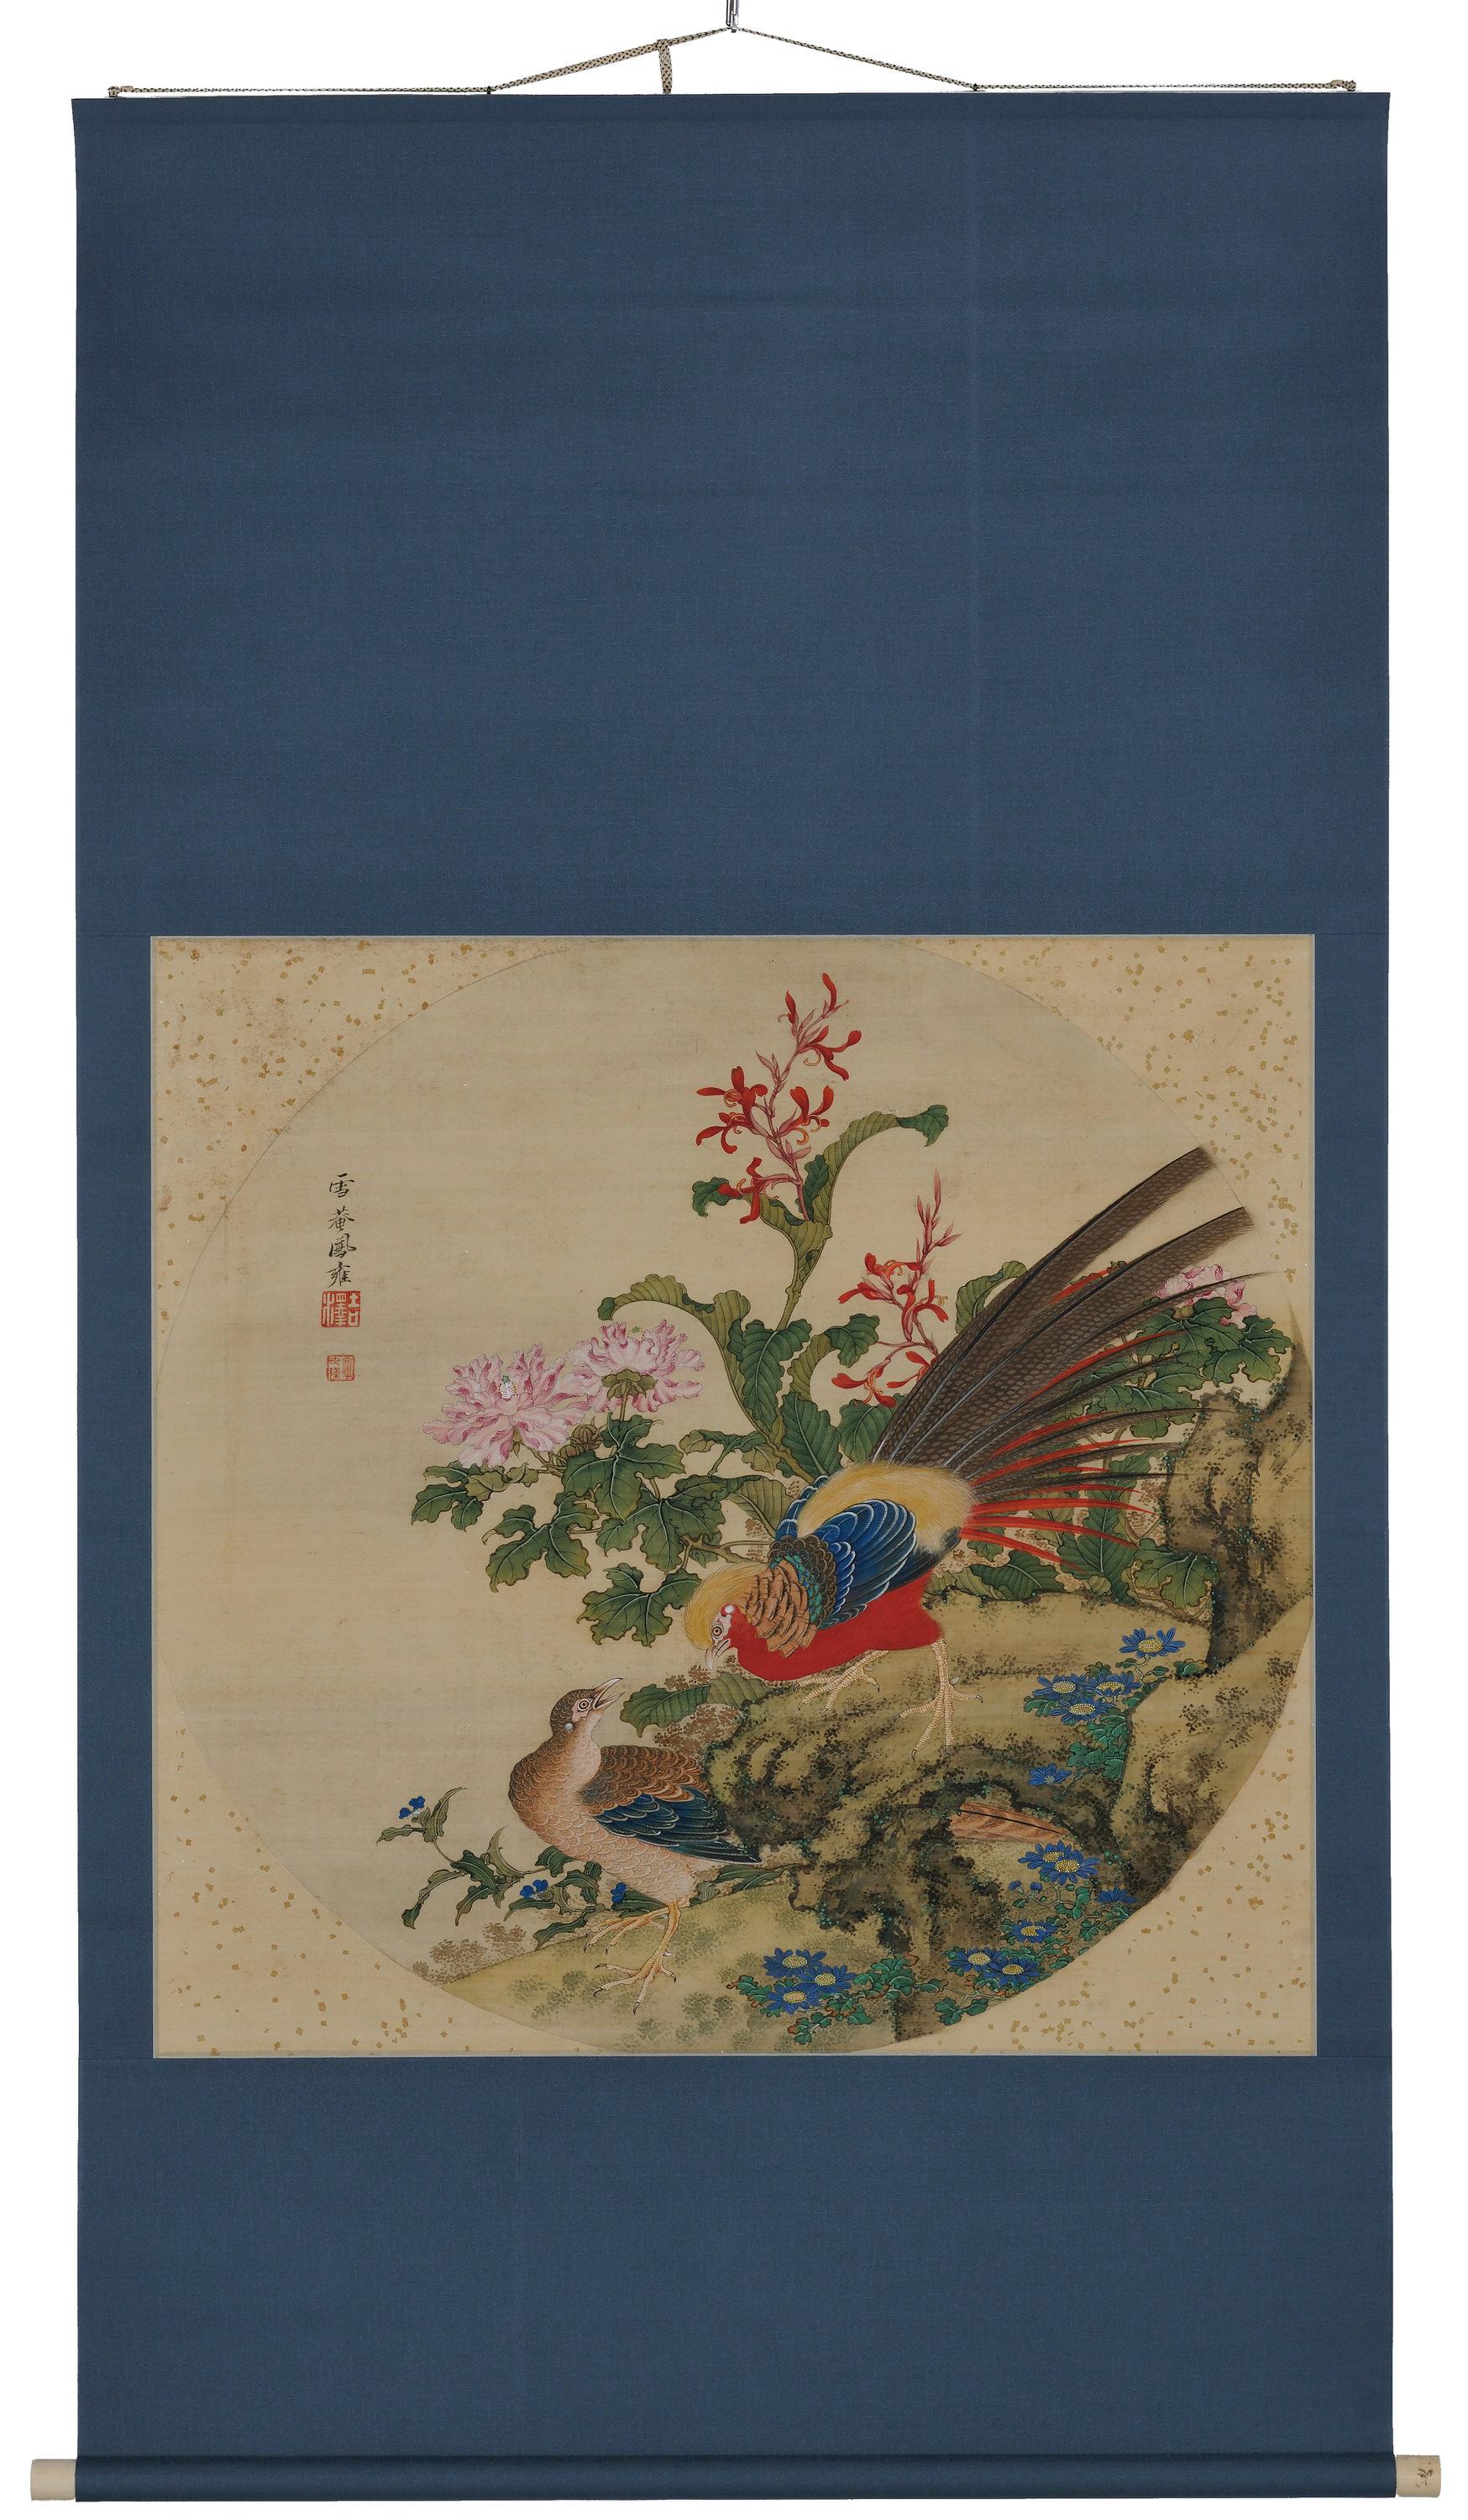 Chinese Pheasants

Yoshizawa Setsuan (1809-1889)

Hanging scroll, ink and color on silk.

Painting inscription: Setsuan Houyou

Upper seal: Yoshizawa

Lower seal: Ji Seryu

Dimensions:

Scroll 175 cm x 96 cm (69” x 38”)

Image 81 cm